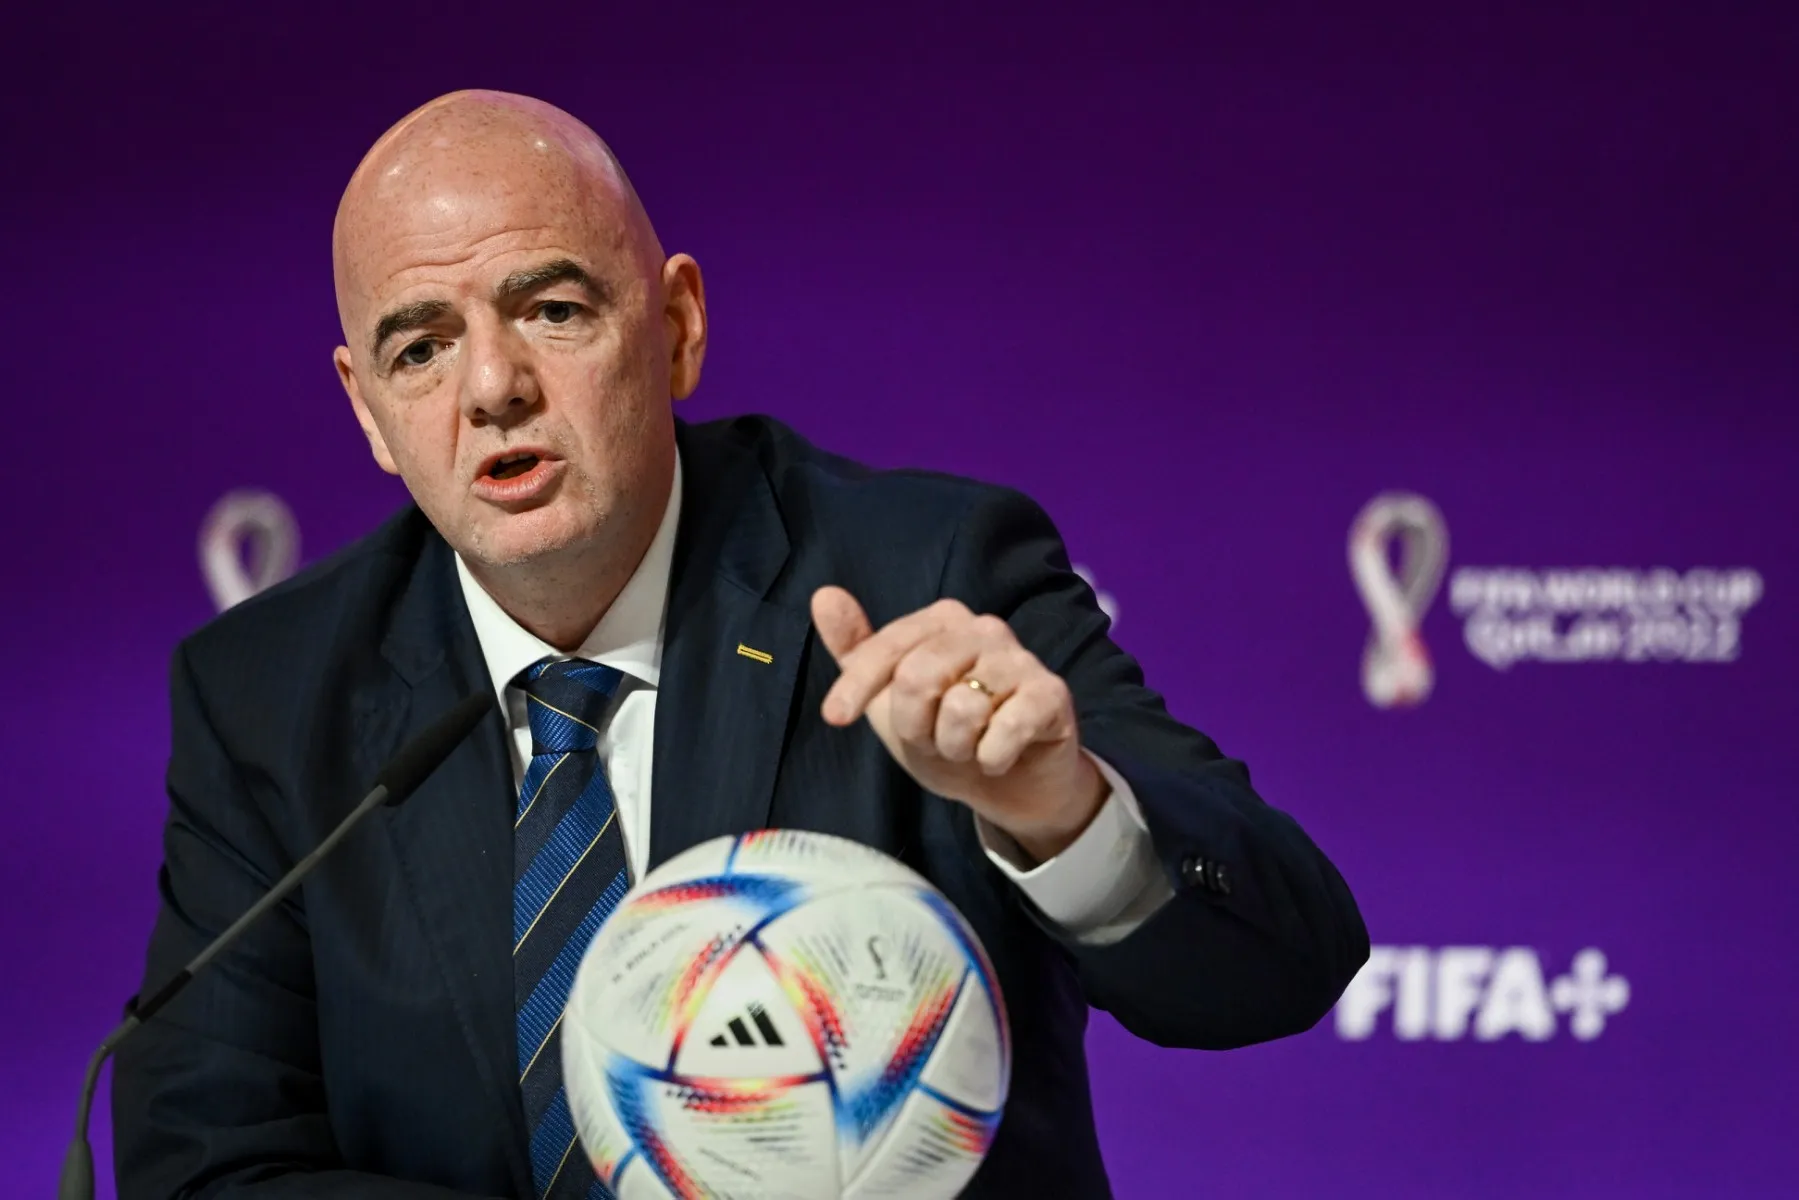 Gianni Infantino Biography, Wikipedia, Age, Salary, Nationality, Height, Instagram, FIFA President